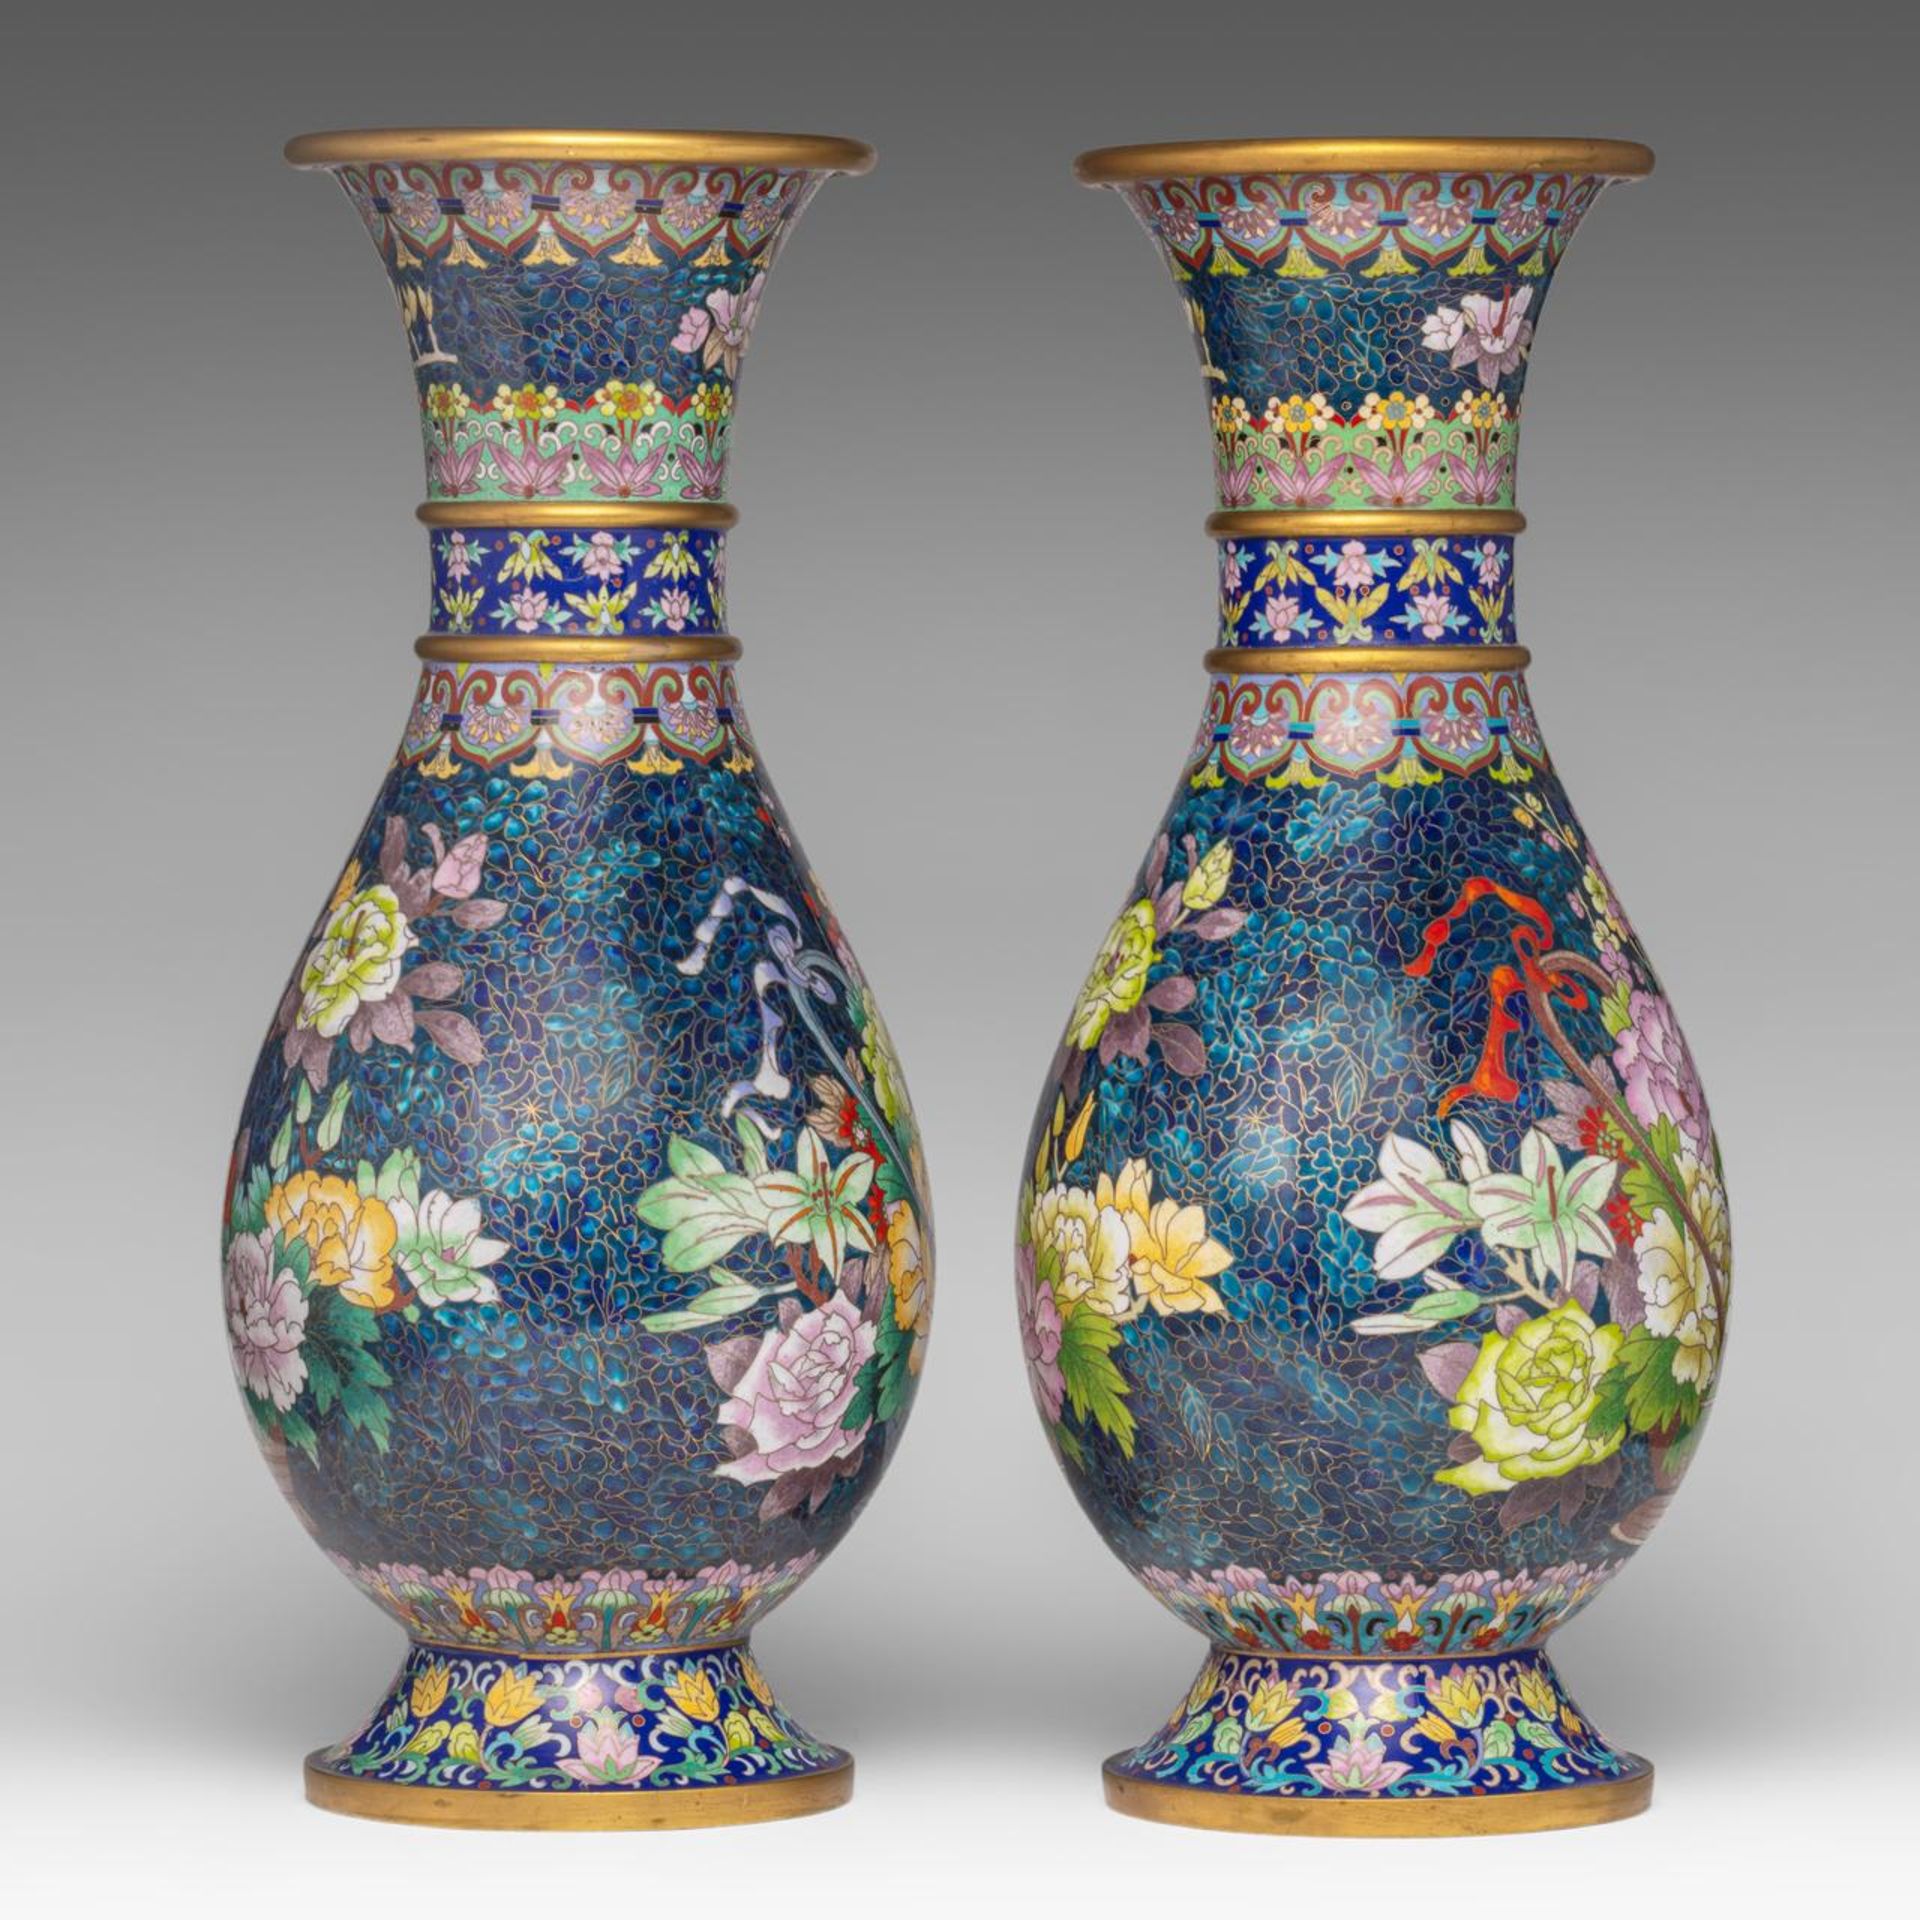 A pair of Chinese cloisonne enamelled 'Flower basket' vases, 20thC, H 52,5 cm - Image 4 of 6